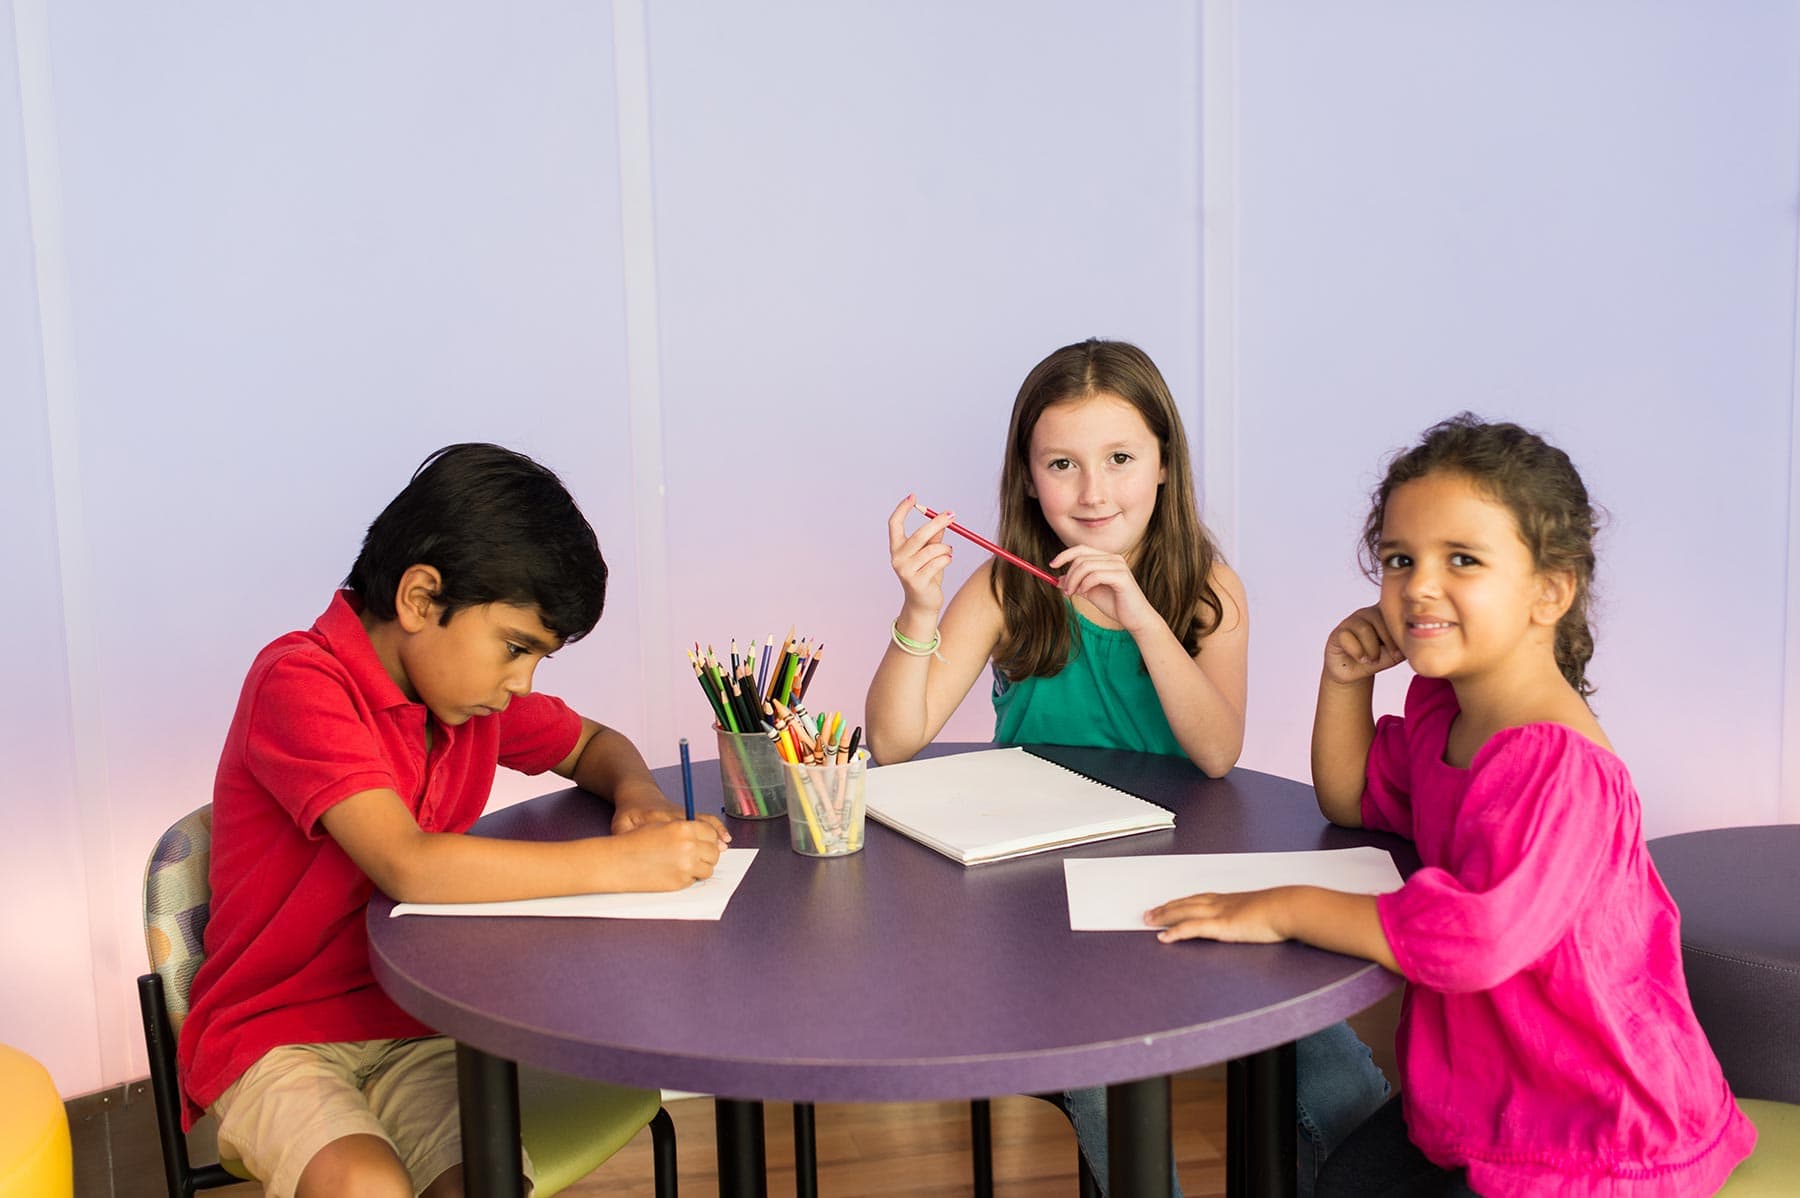 Three children draw at a table after they've finished their ultrasound exam